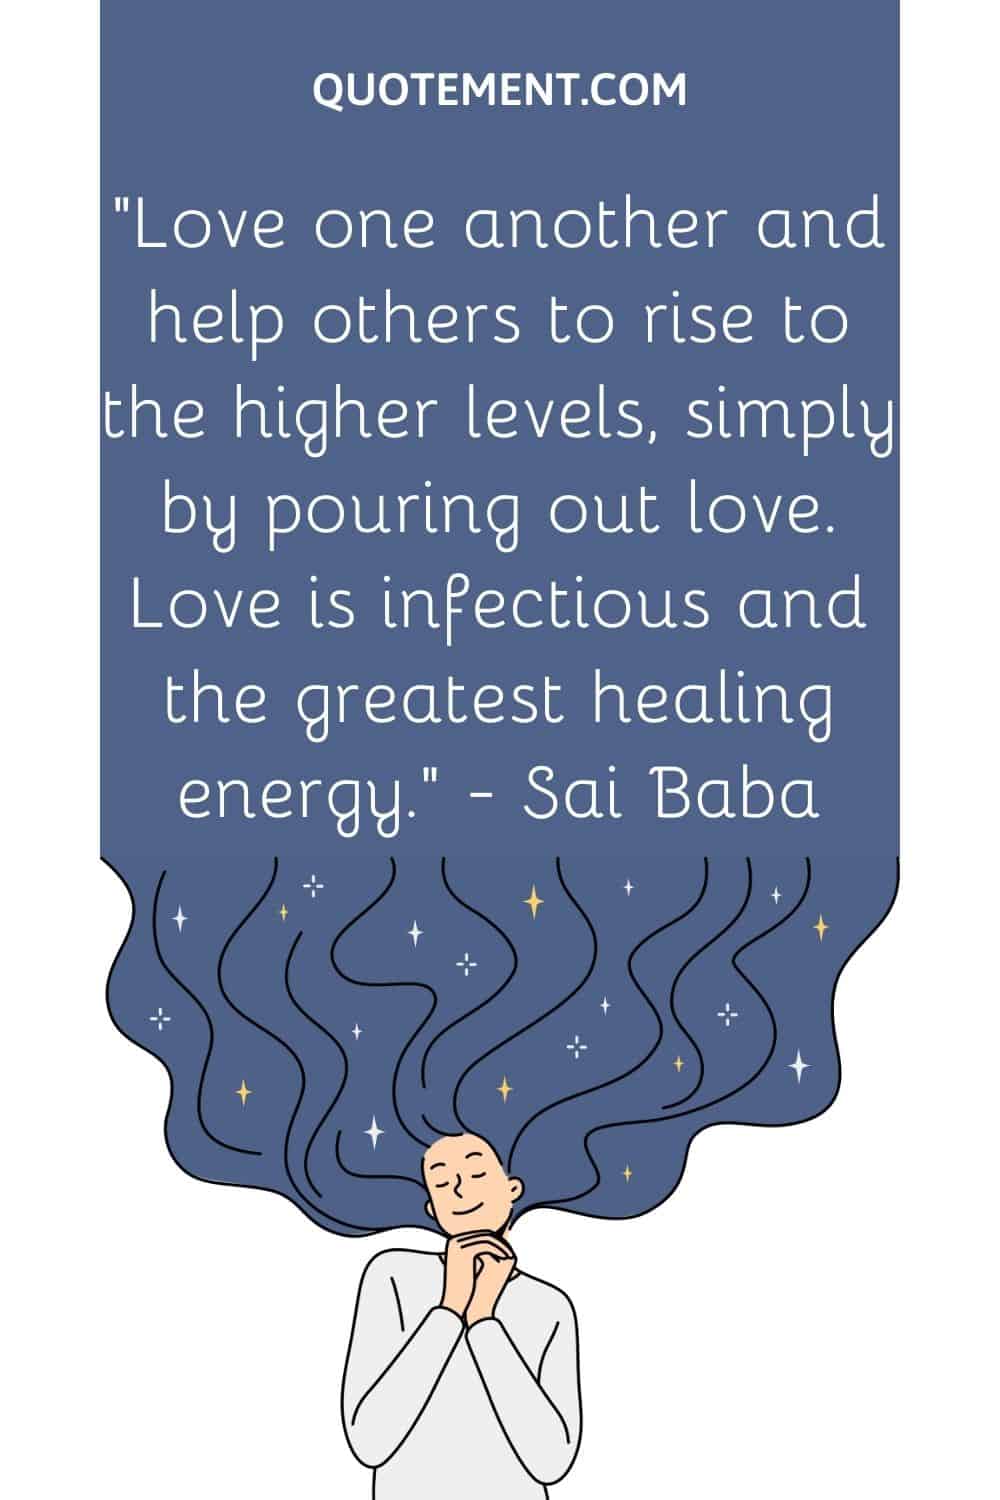 Love one another and help others to rise to the higher levels, simply by pouring out love